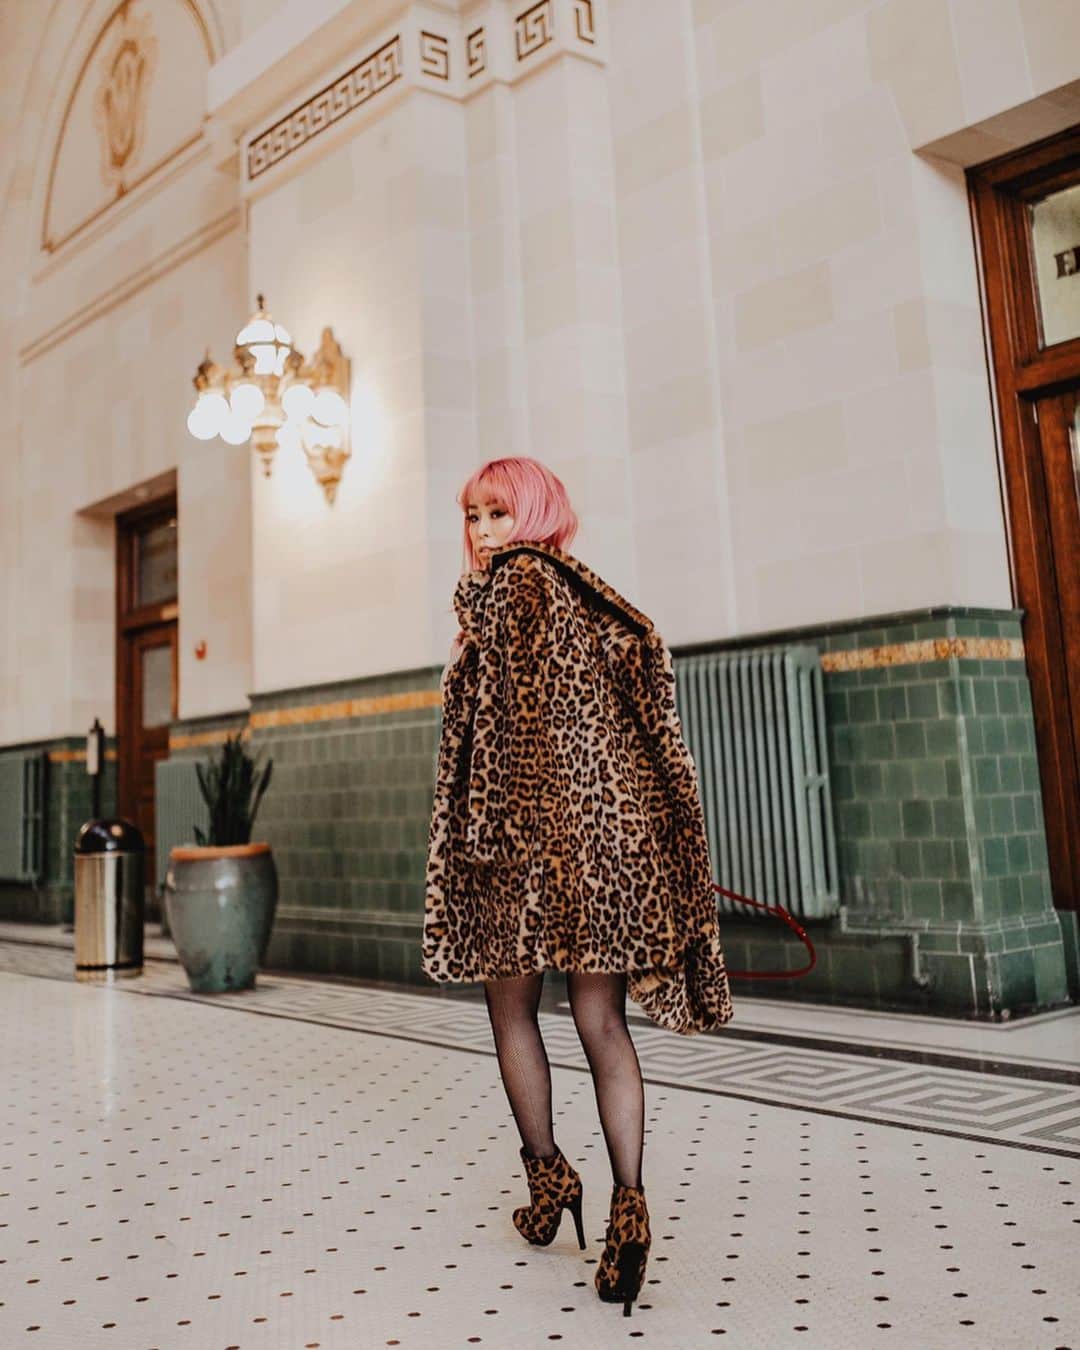 AikA♡ • 愛香 | JP Blogger • ブロガーのインスタグラム：「2020, hear me roar 🐆💞 Let's find our inner leopard this year and pounce on every opportunity 🖤 🐆🐆﻿ Check my stories to peek how I was rocking this, my go-to leopard coat, for grocery shopping 🛒 🎌 and I share my fave instant Yakisoba noodle 😋🥢 Have you tried any?! It’s so YUM!! ﻿ ﻿ ⋆ ⋆ ⋆ ⋆ ﻿ ﻿ レオパード柄ゎ今年もヘビロテ間違いなし🐆﻿ コートもブーツも少し前のだけど﻿ 未だに毎年着るの🖤﻿🧥👢 以外にさらっと着れて一気におしゃれ感増すから﻿ スーパーでお買い物🛒でも目立てますの🤣✨ ストーリーズ見てね！！😋🥢﻿ -﻿ 📷: @marcellarphoto  #leopardprint #petitefashion #5feetstyle #pinkhair #winteroutfits #seattlefashionblogger #レオパード」